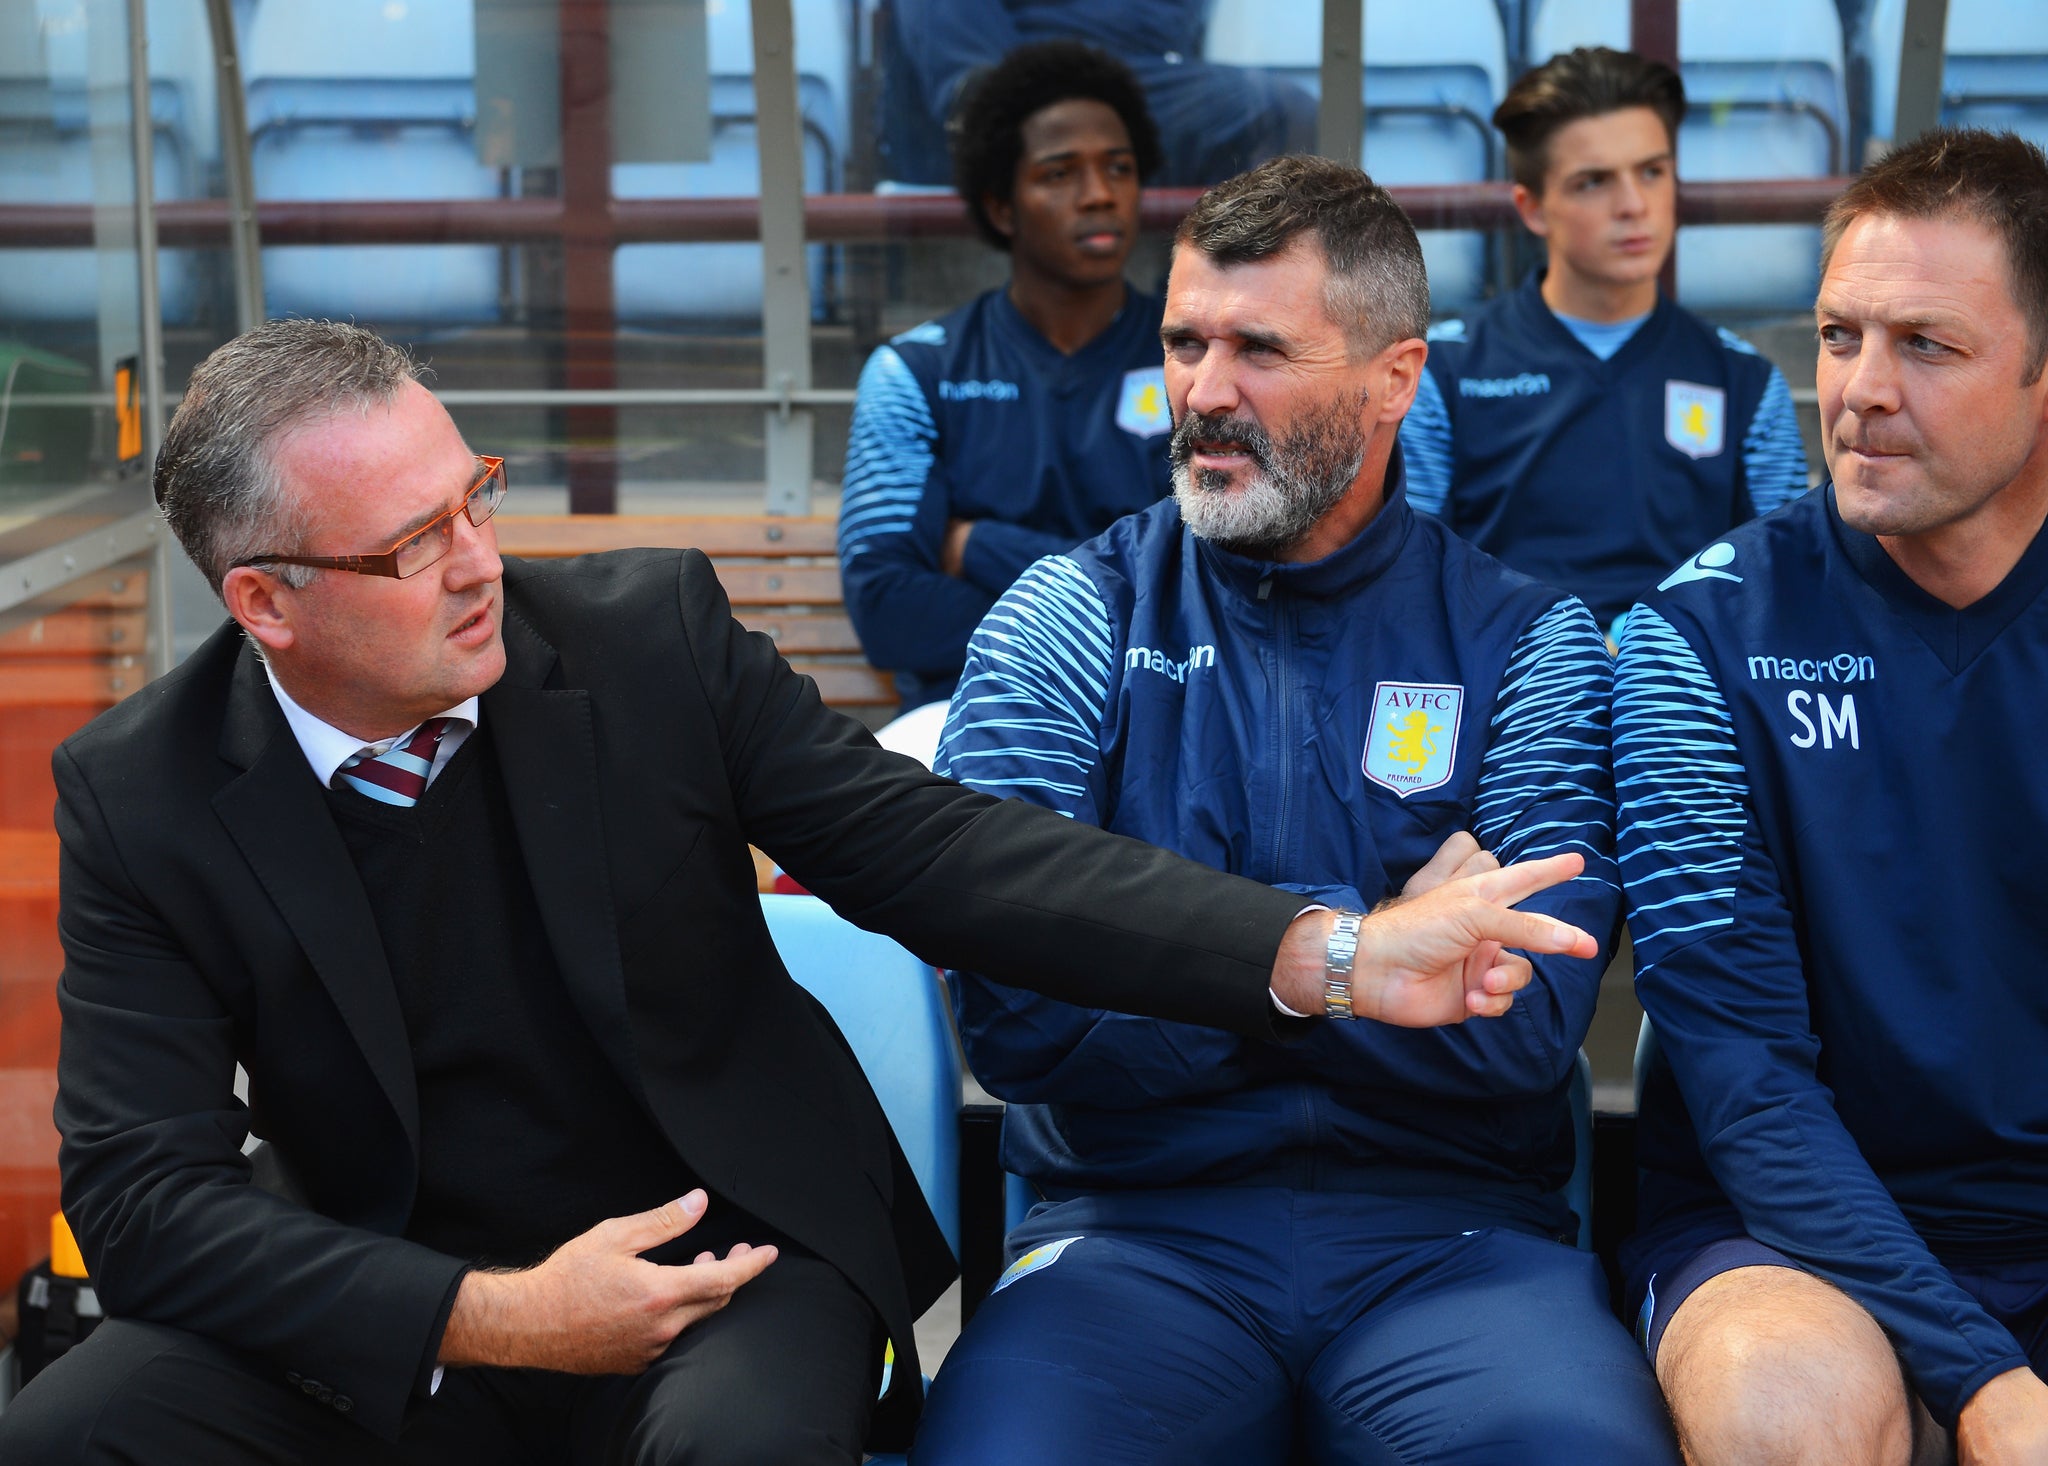 Paul Lambert and Aston Villa assistant manager Roy Keane look on during the match. Keane was uncharacteristically quiet on the sidelines